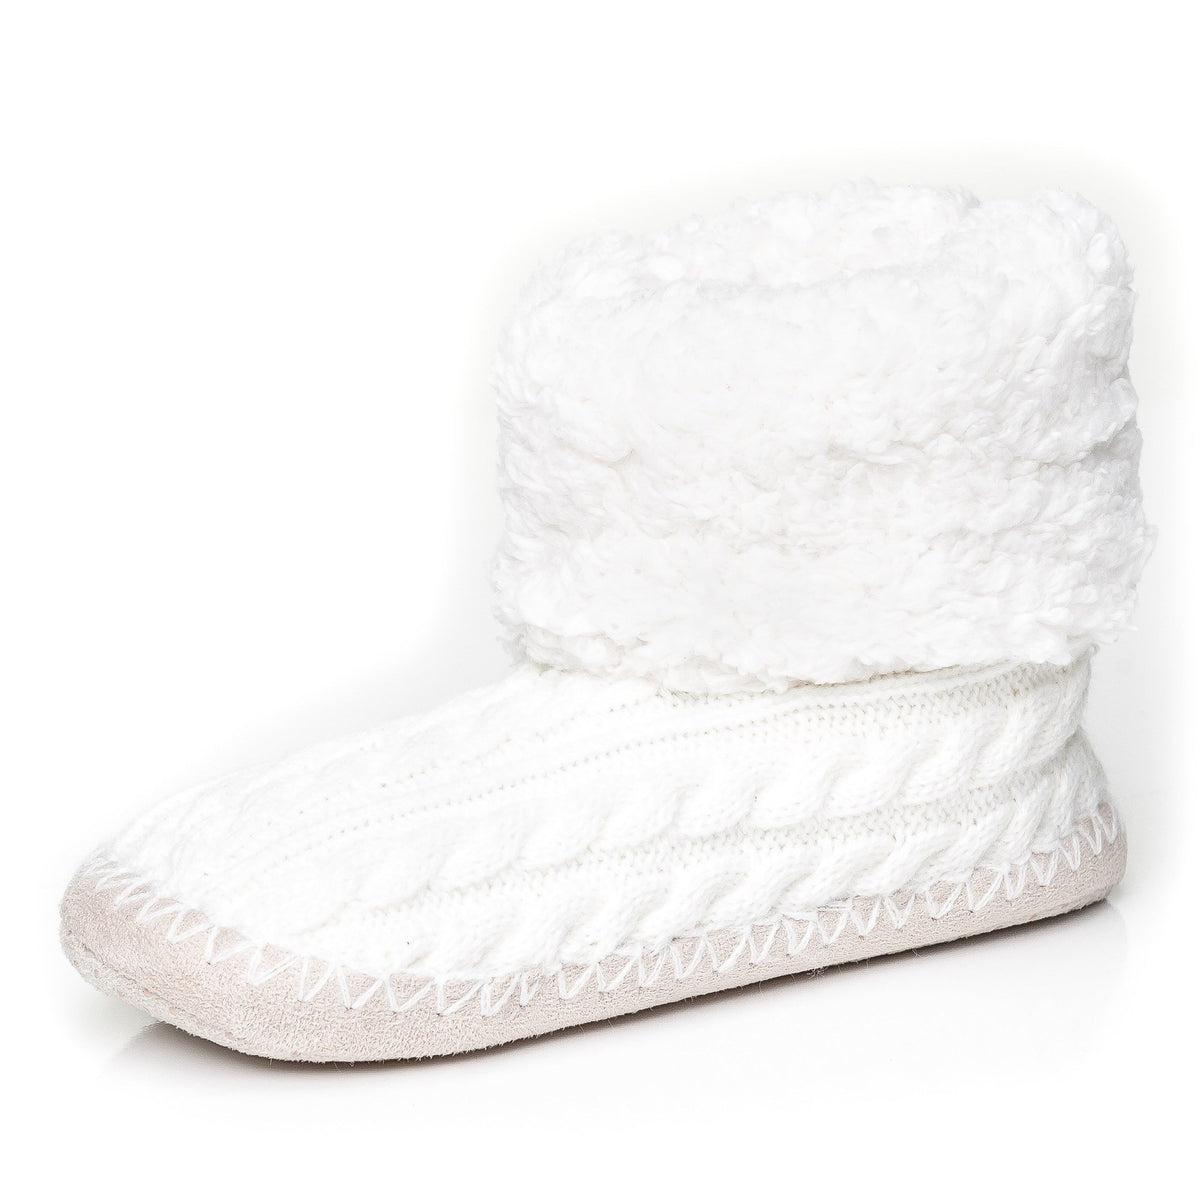 Women's Fuzzy Delight Cable Knit Indoor Short Boot Slippers - Ivory